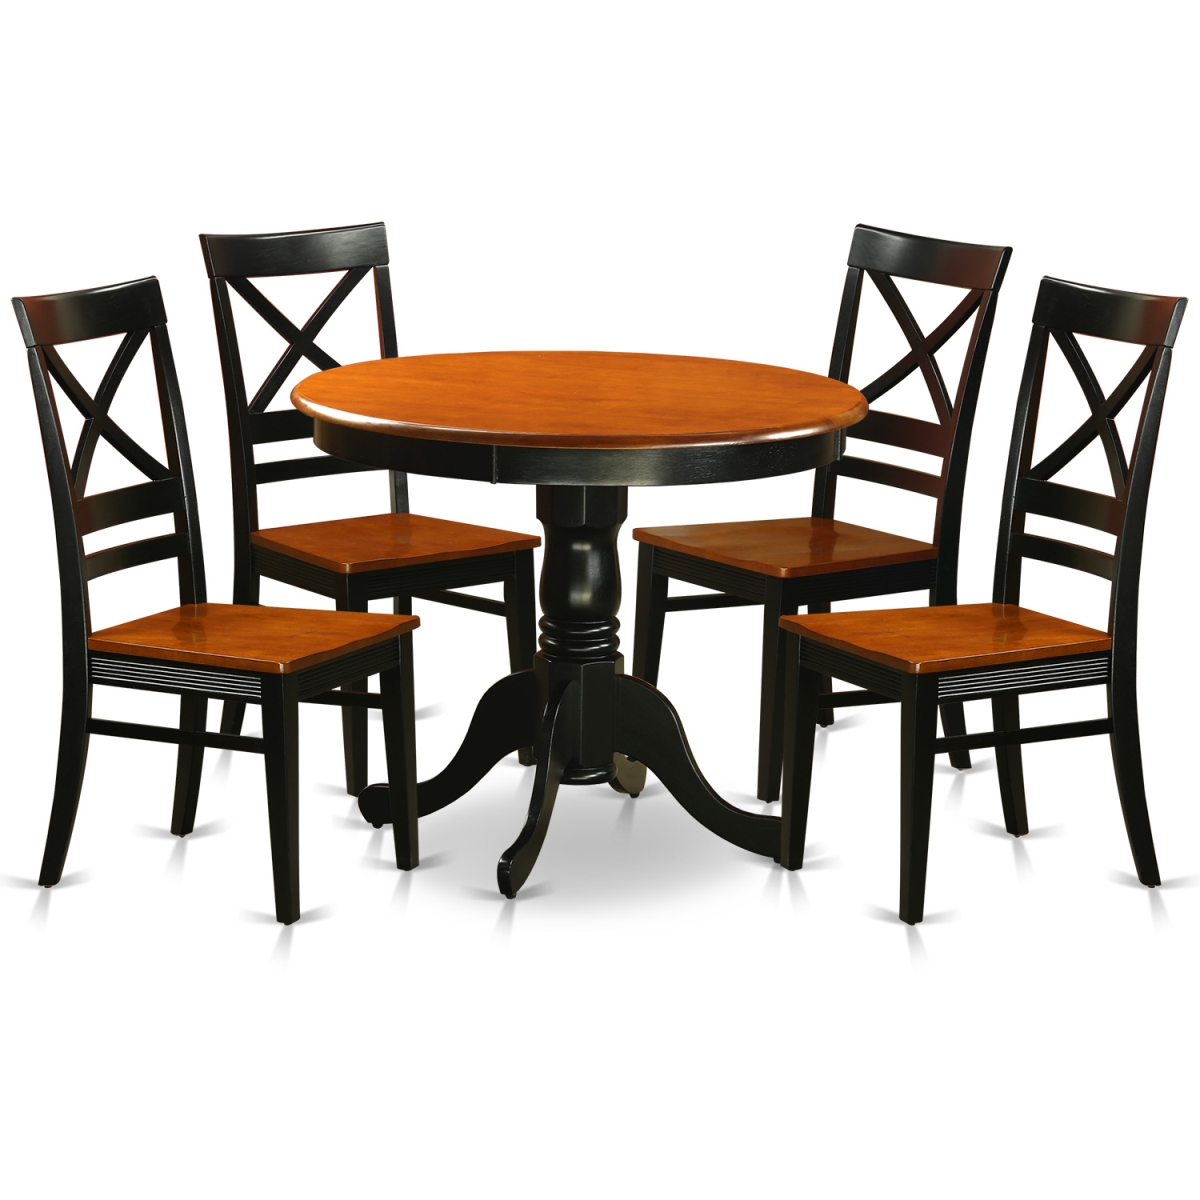 Picture of East West Furniture ANQU5-BLK-W Wood Seat Dining Set with 4 Solid Chair, Black & Cherry - 5 Piece